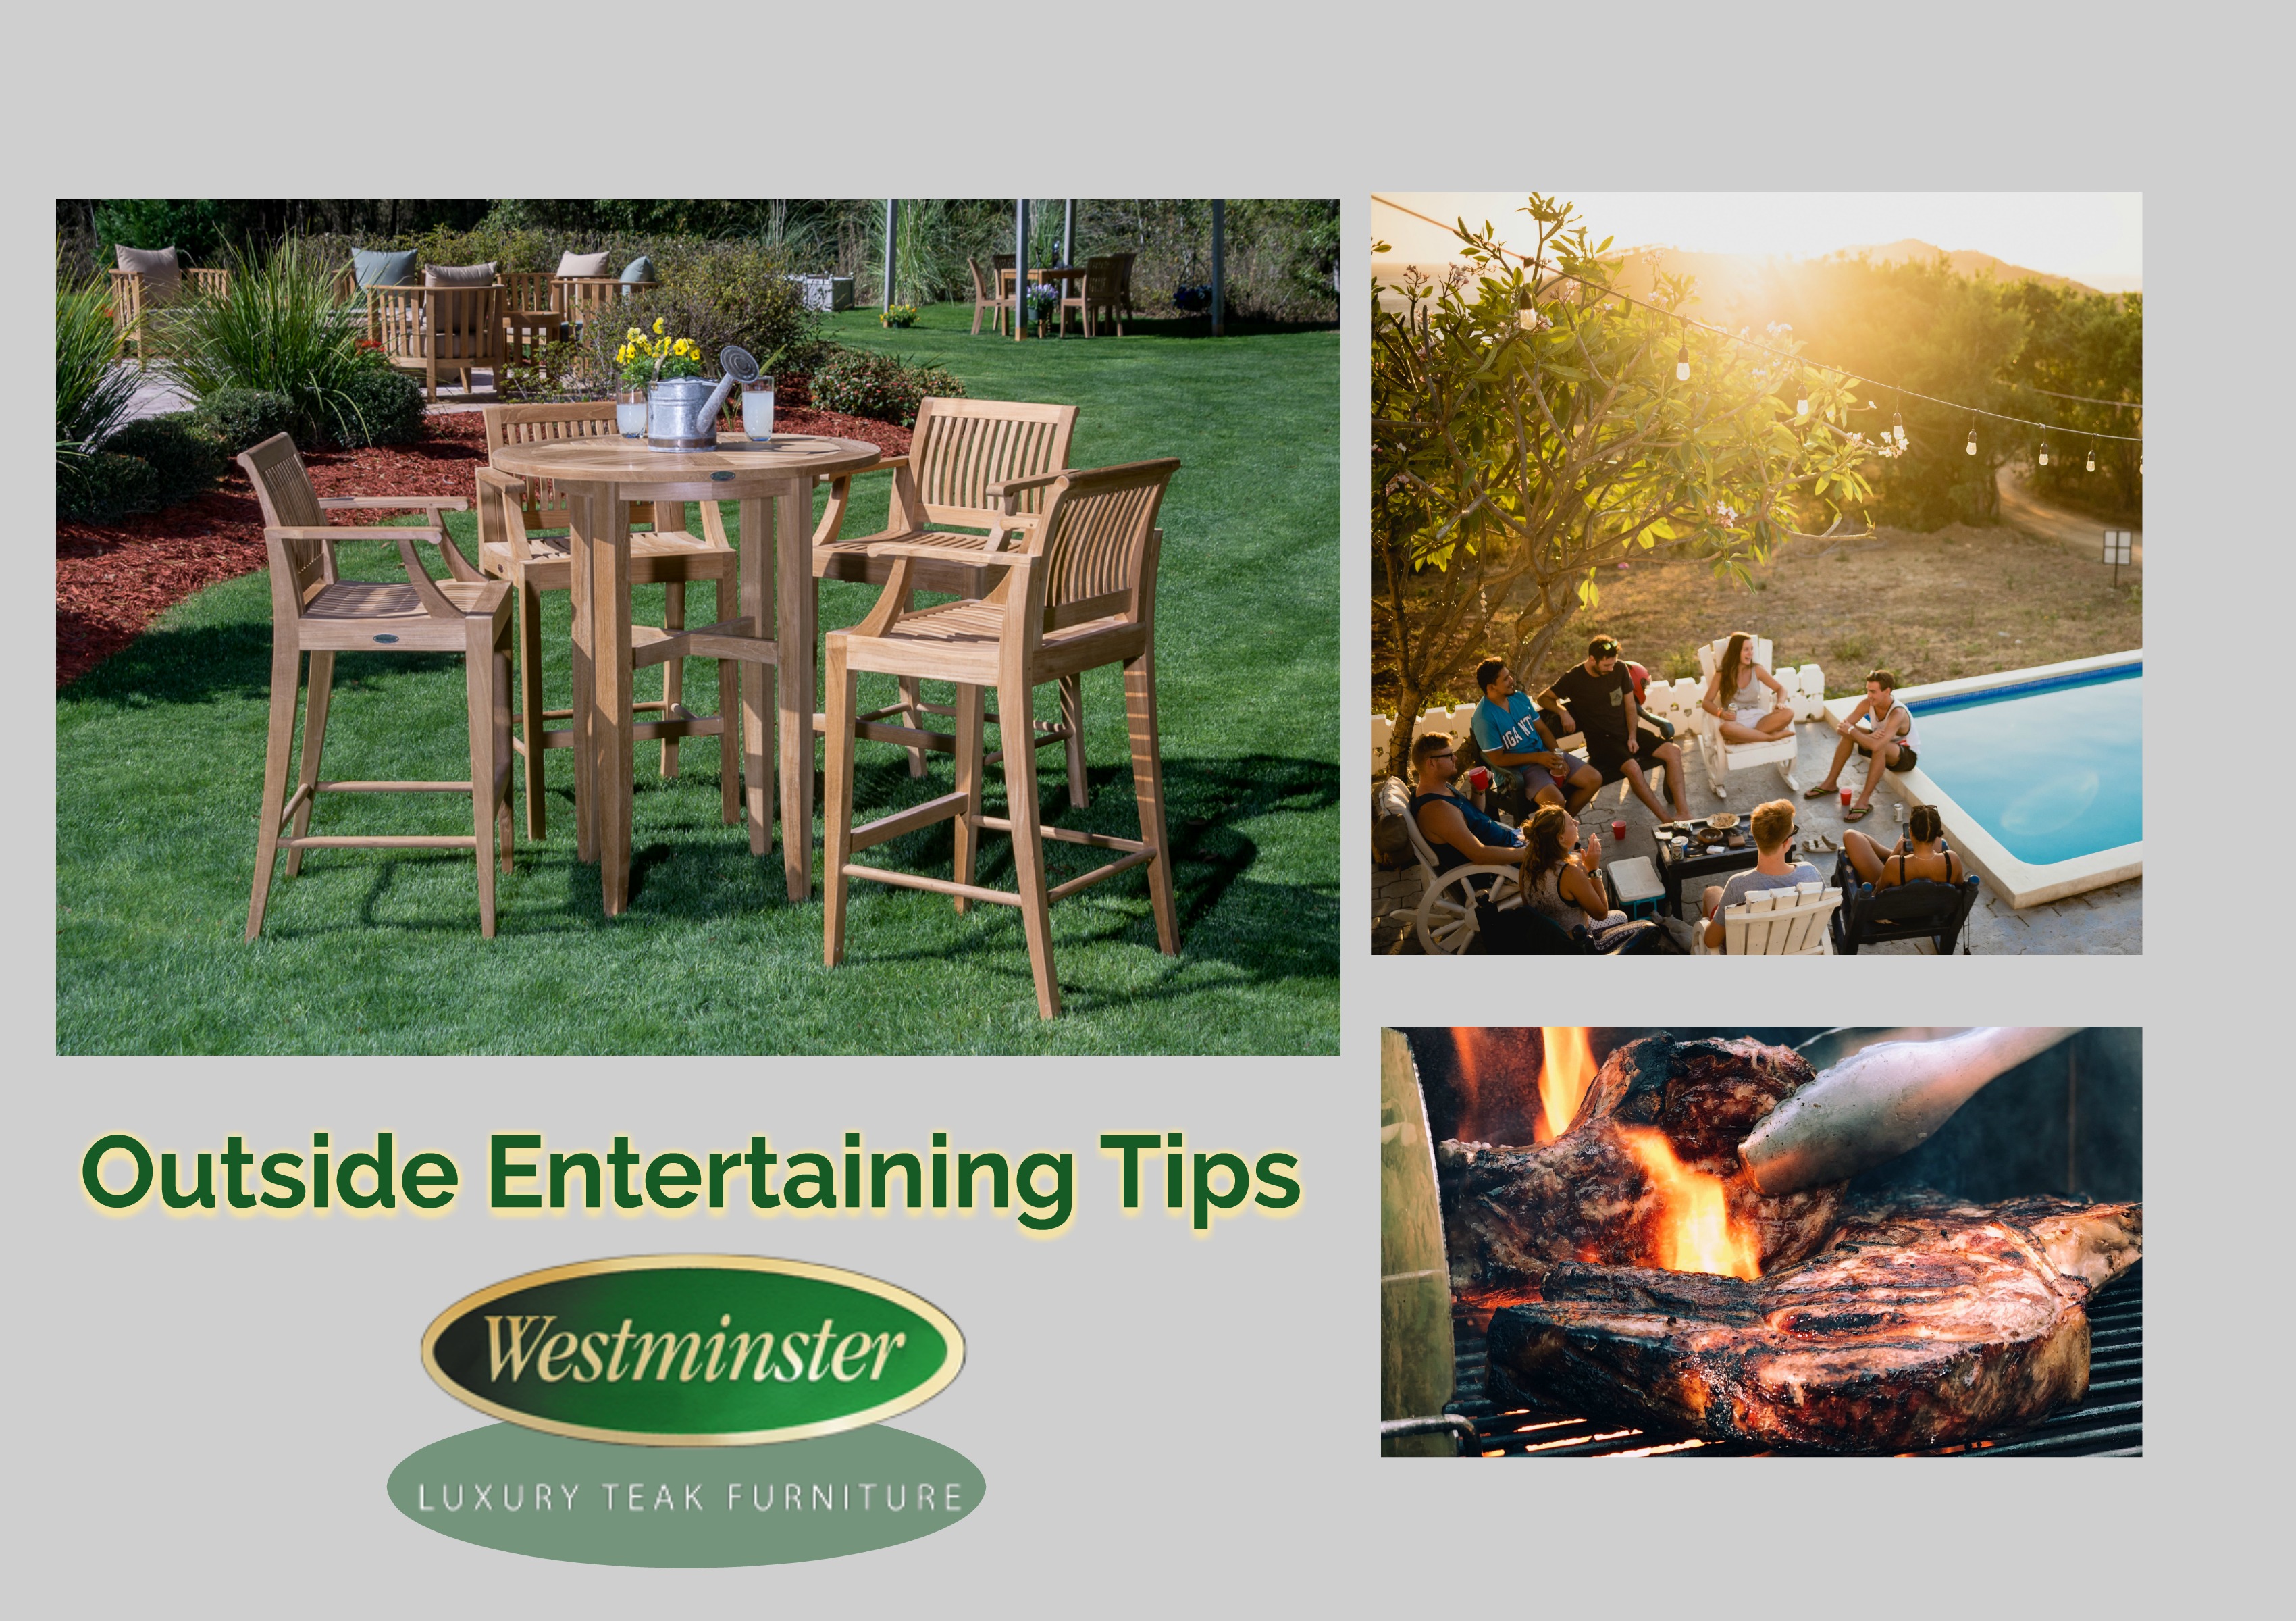 Tips for Entertaining Guests Outside